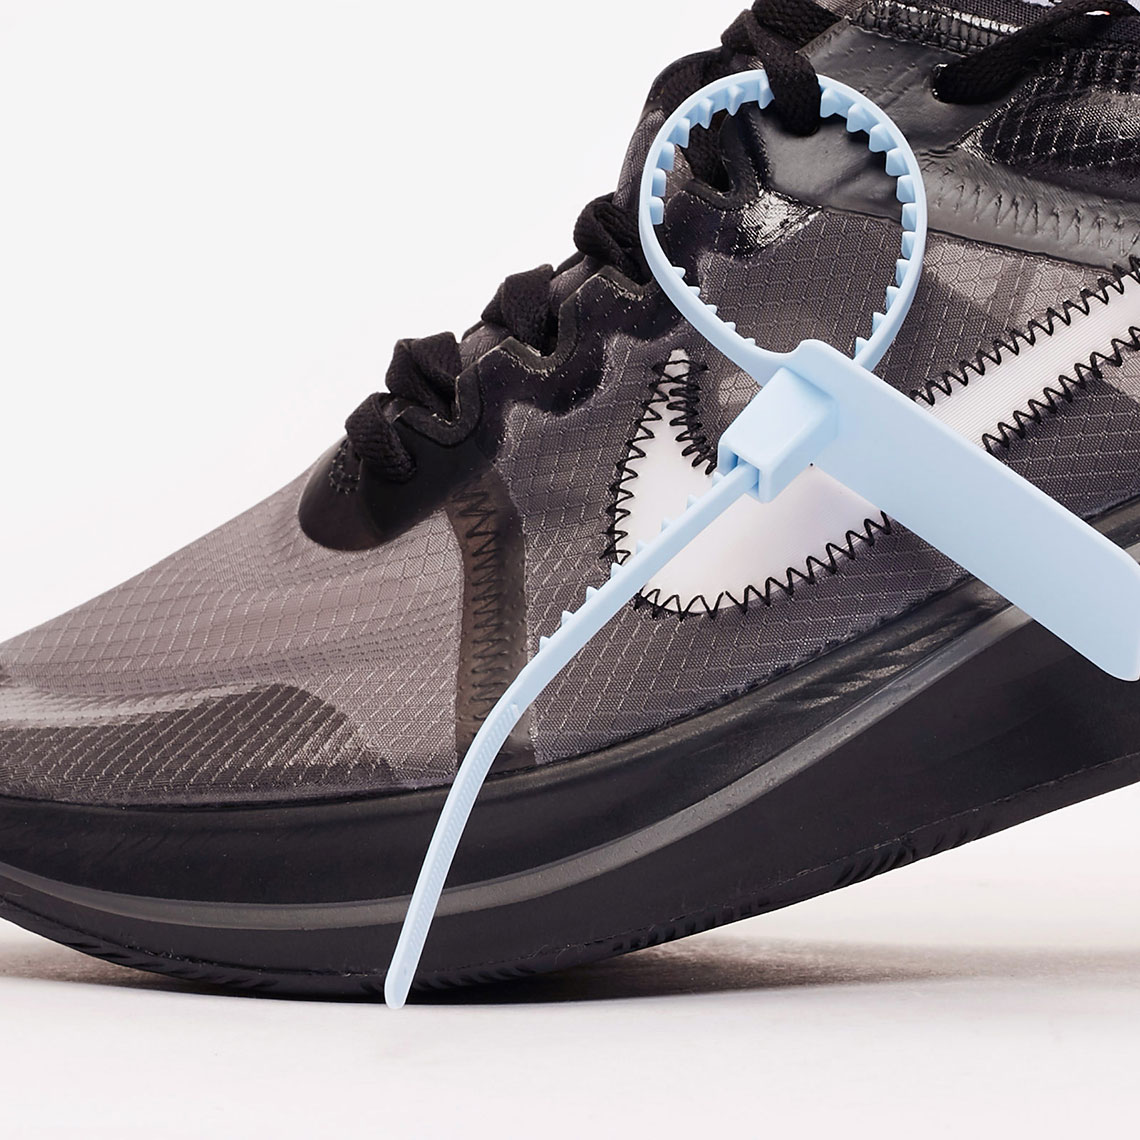 The OFF-WHITE x Nike Zoom Fly SP Black Releases In A Couple Of